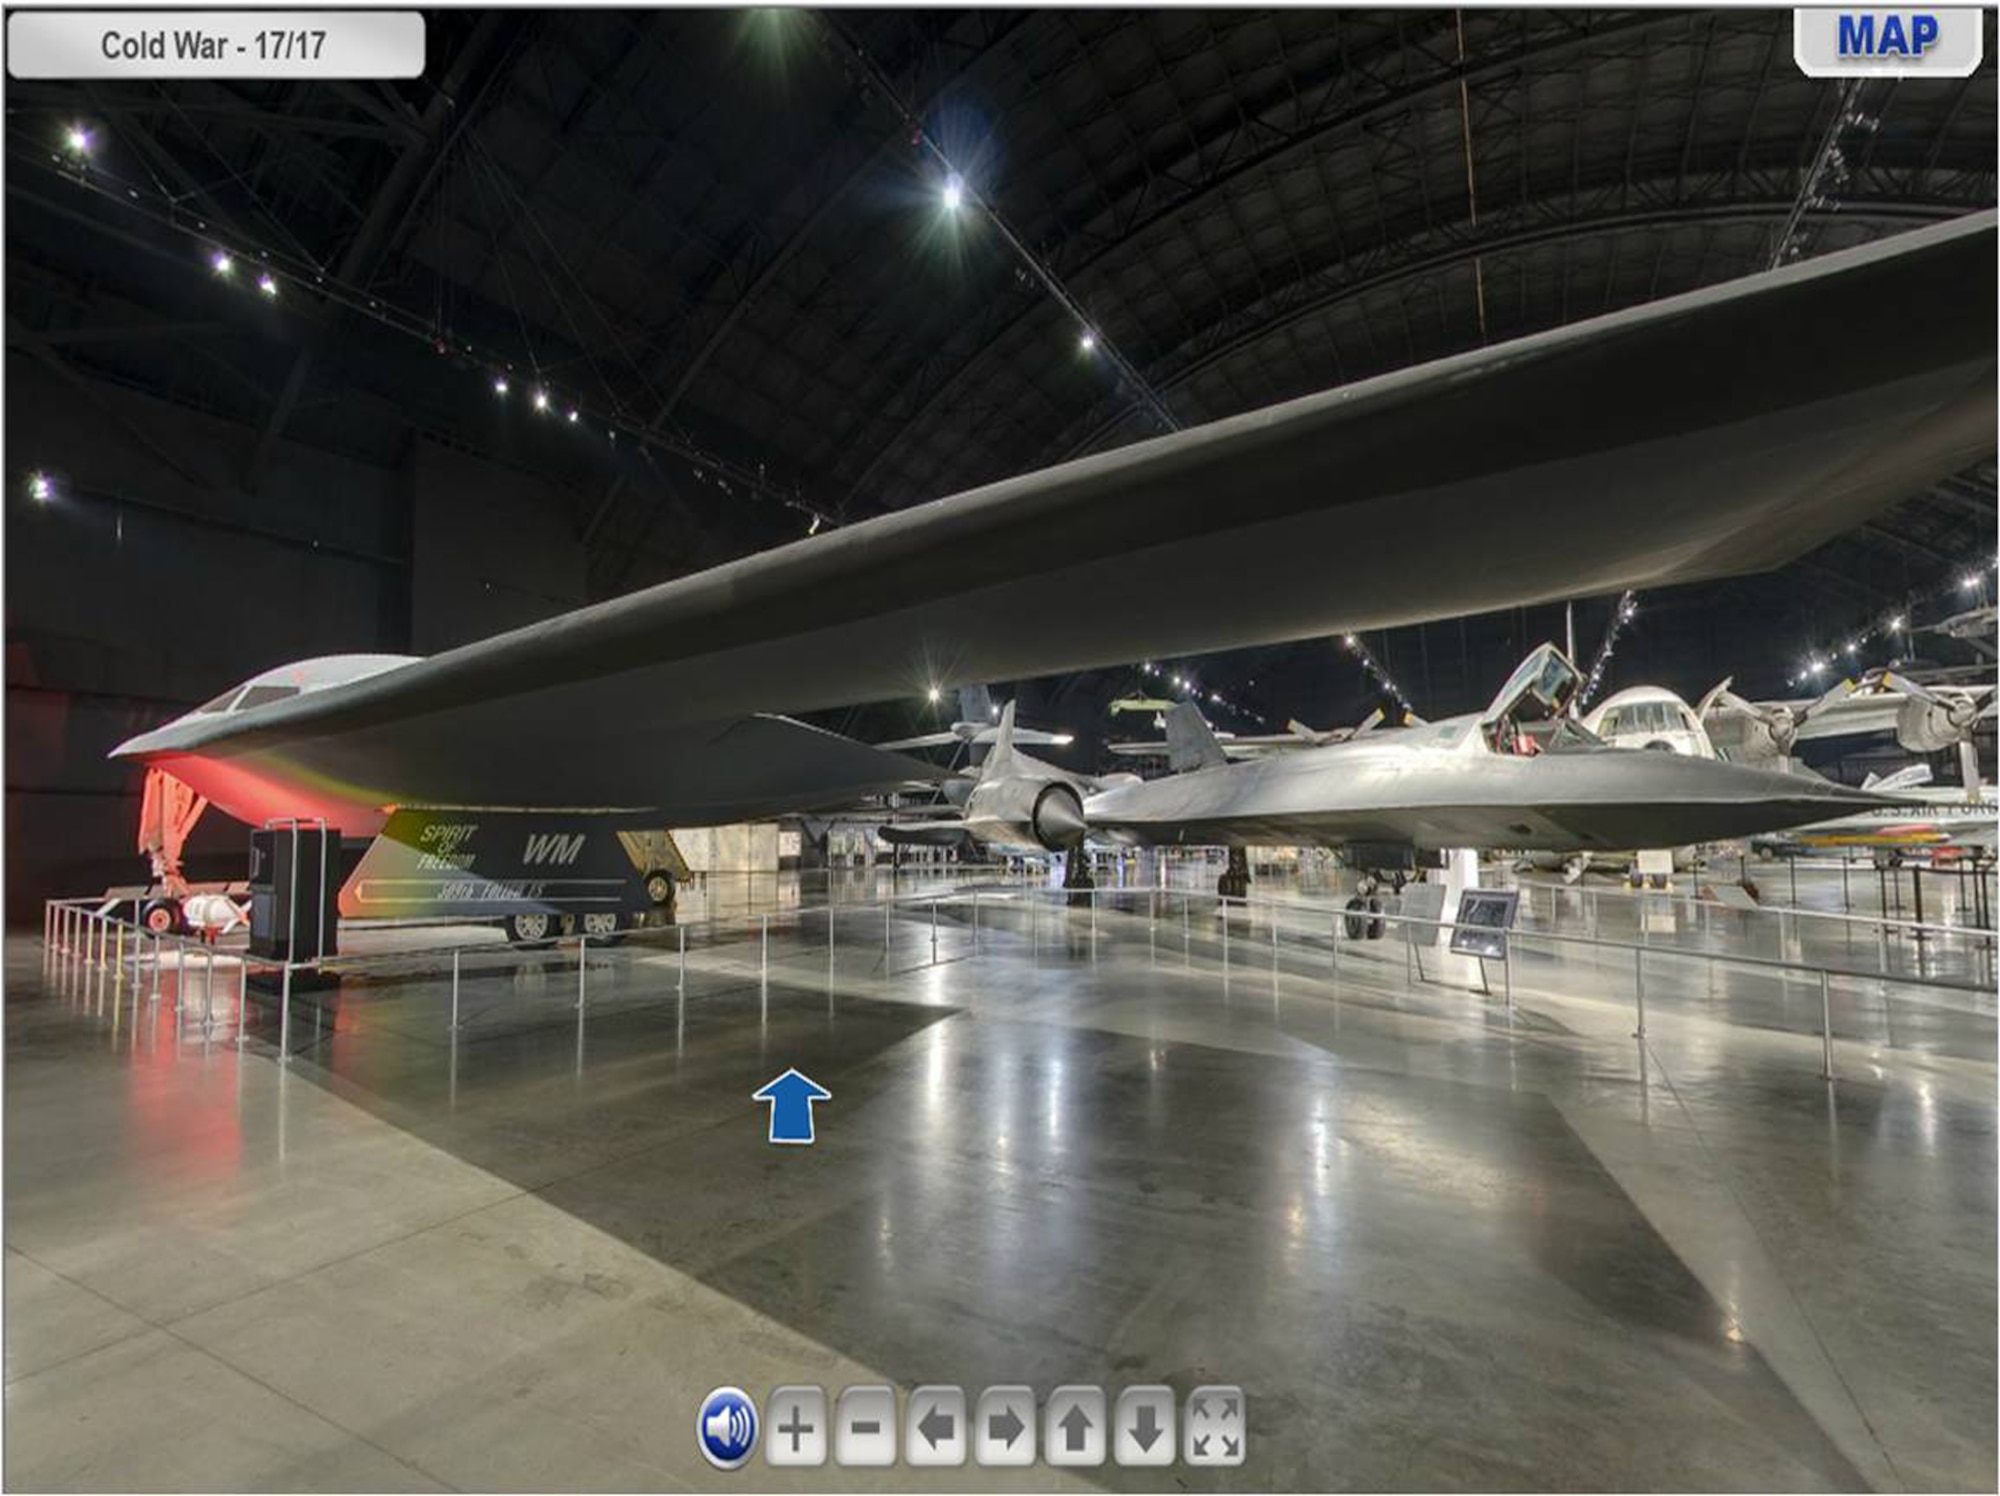 Pictured here is a screenshot of the B-2 Spirit and SR-71A from the National Museum of the U.S. Air Force's Virtual Tour website. The aircraft are located in the Cold War Gallery. (U.S. Air Force image)